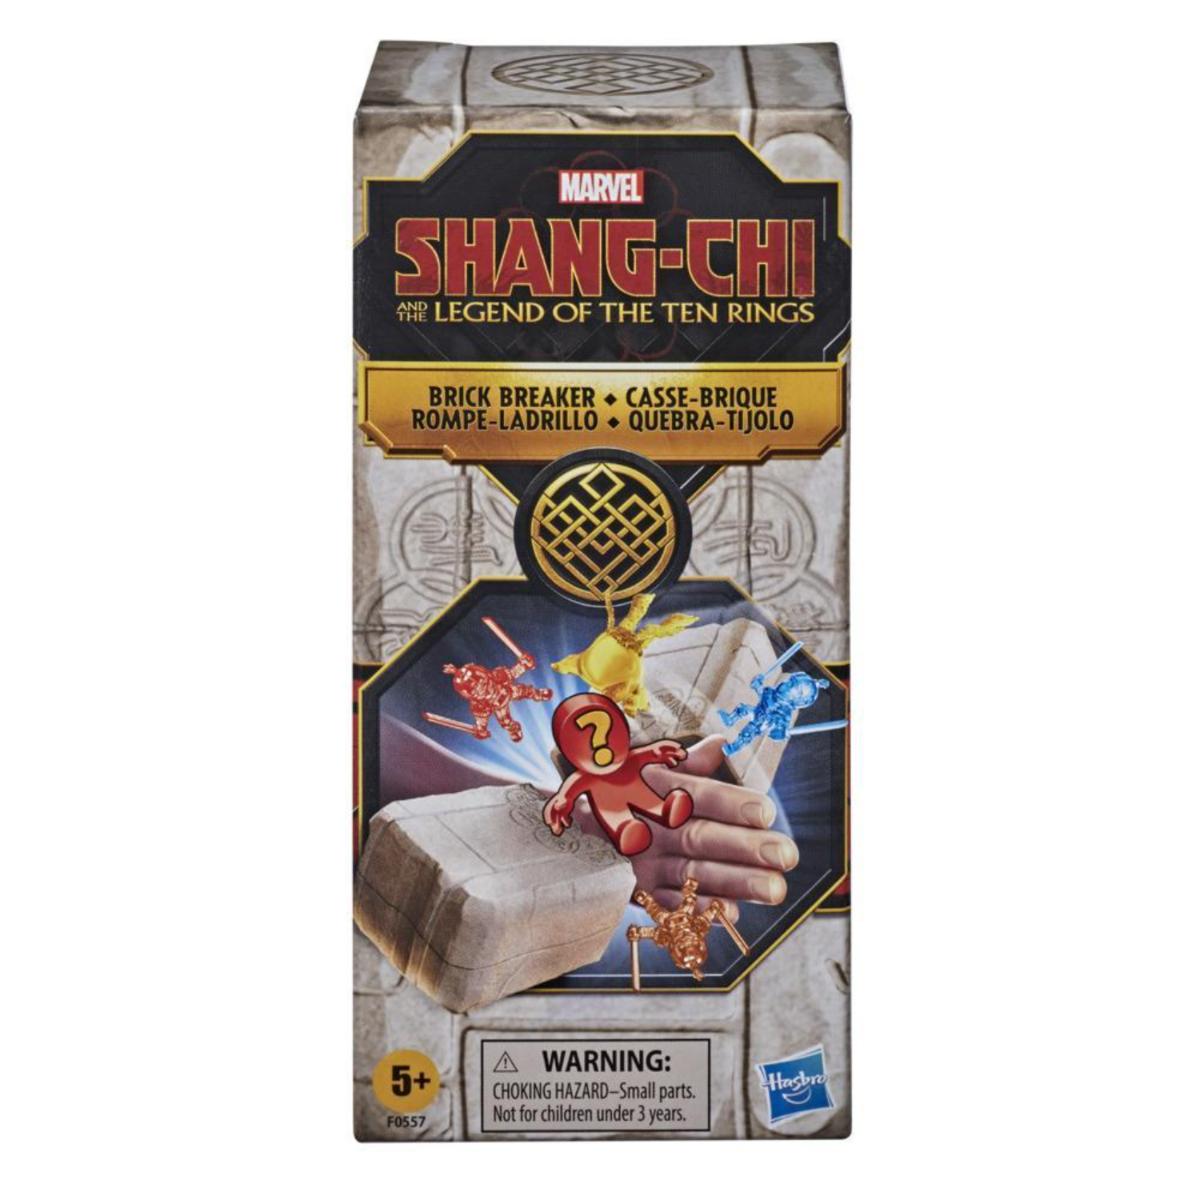 SHANG-CHI ROMPE LADRILLOS COLECCIONABLE